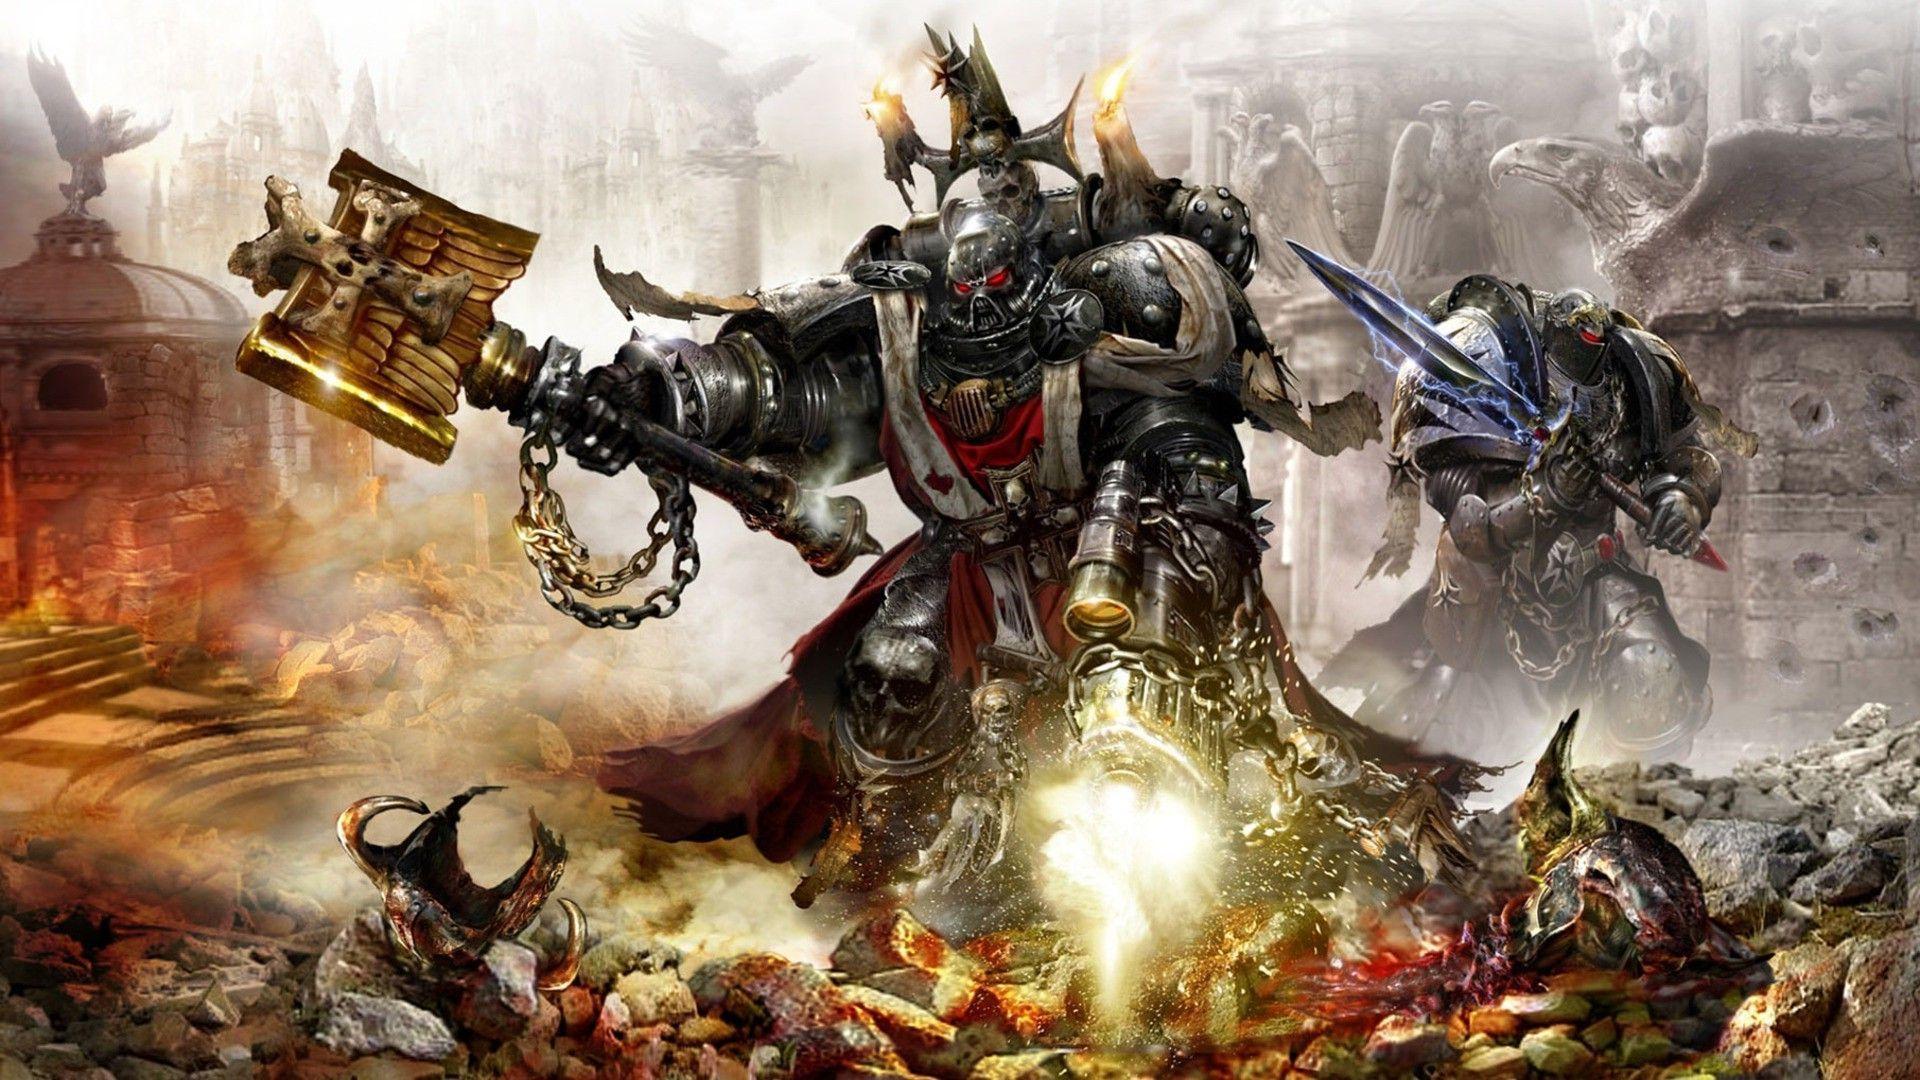 Warhammer Wallpaper, High Quality Pics of Warhammer in Awesome